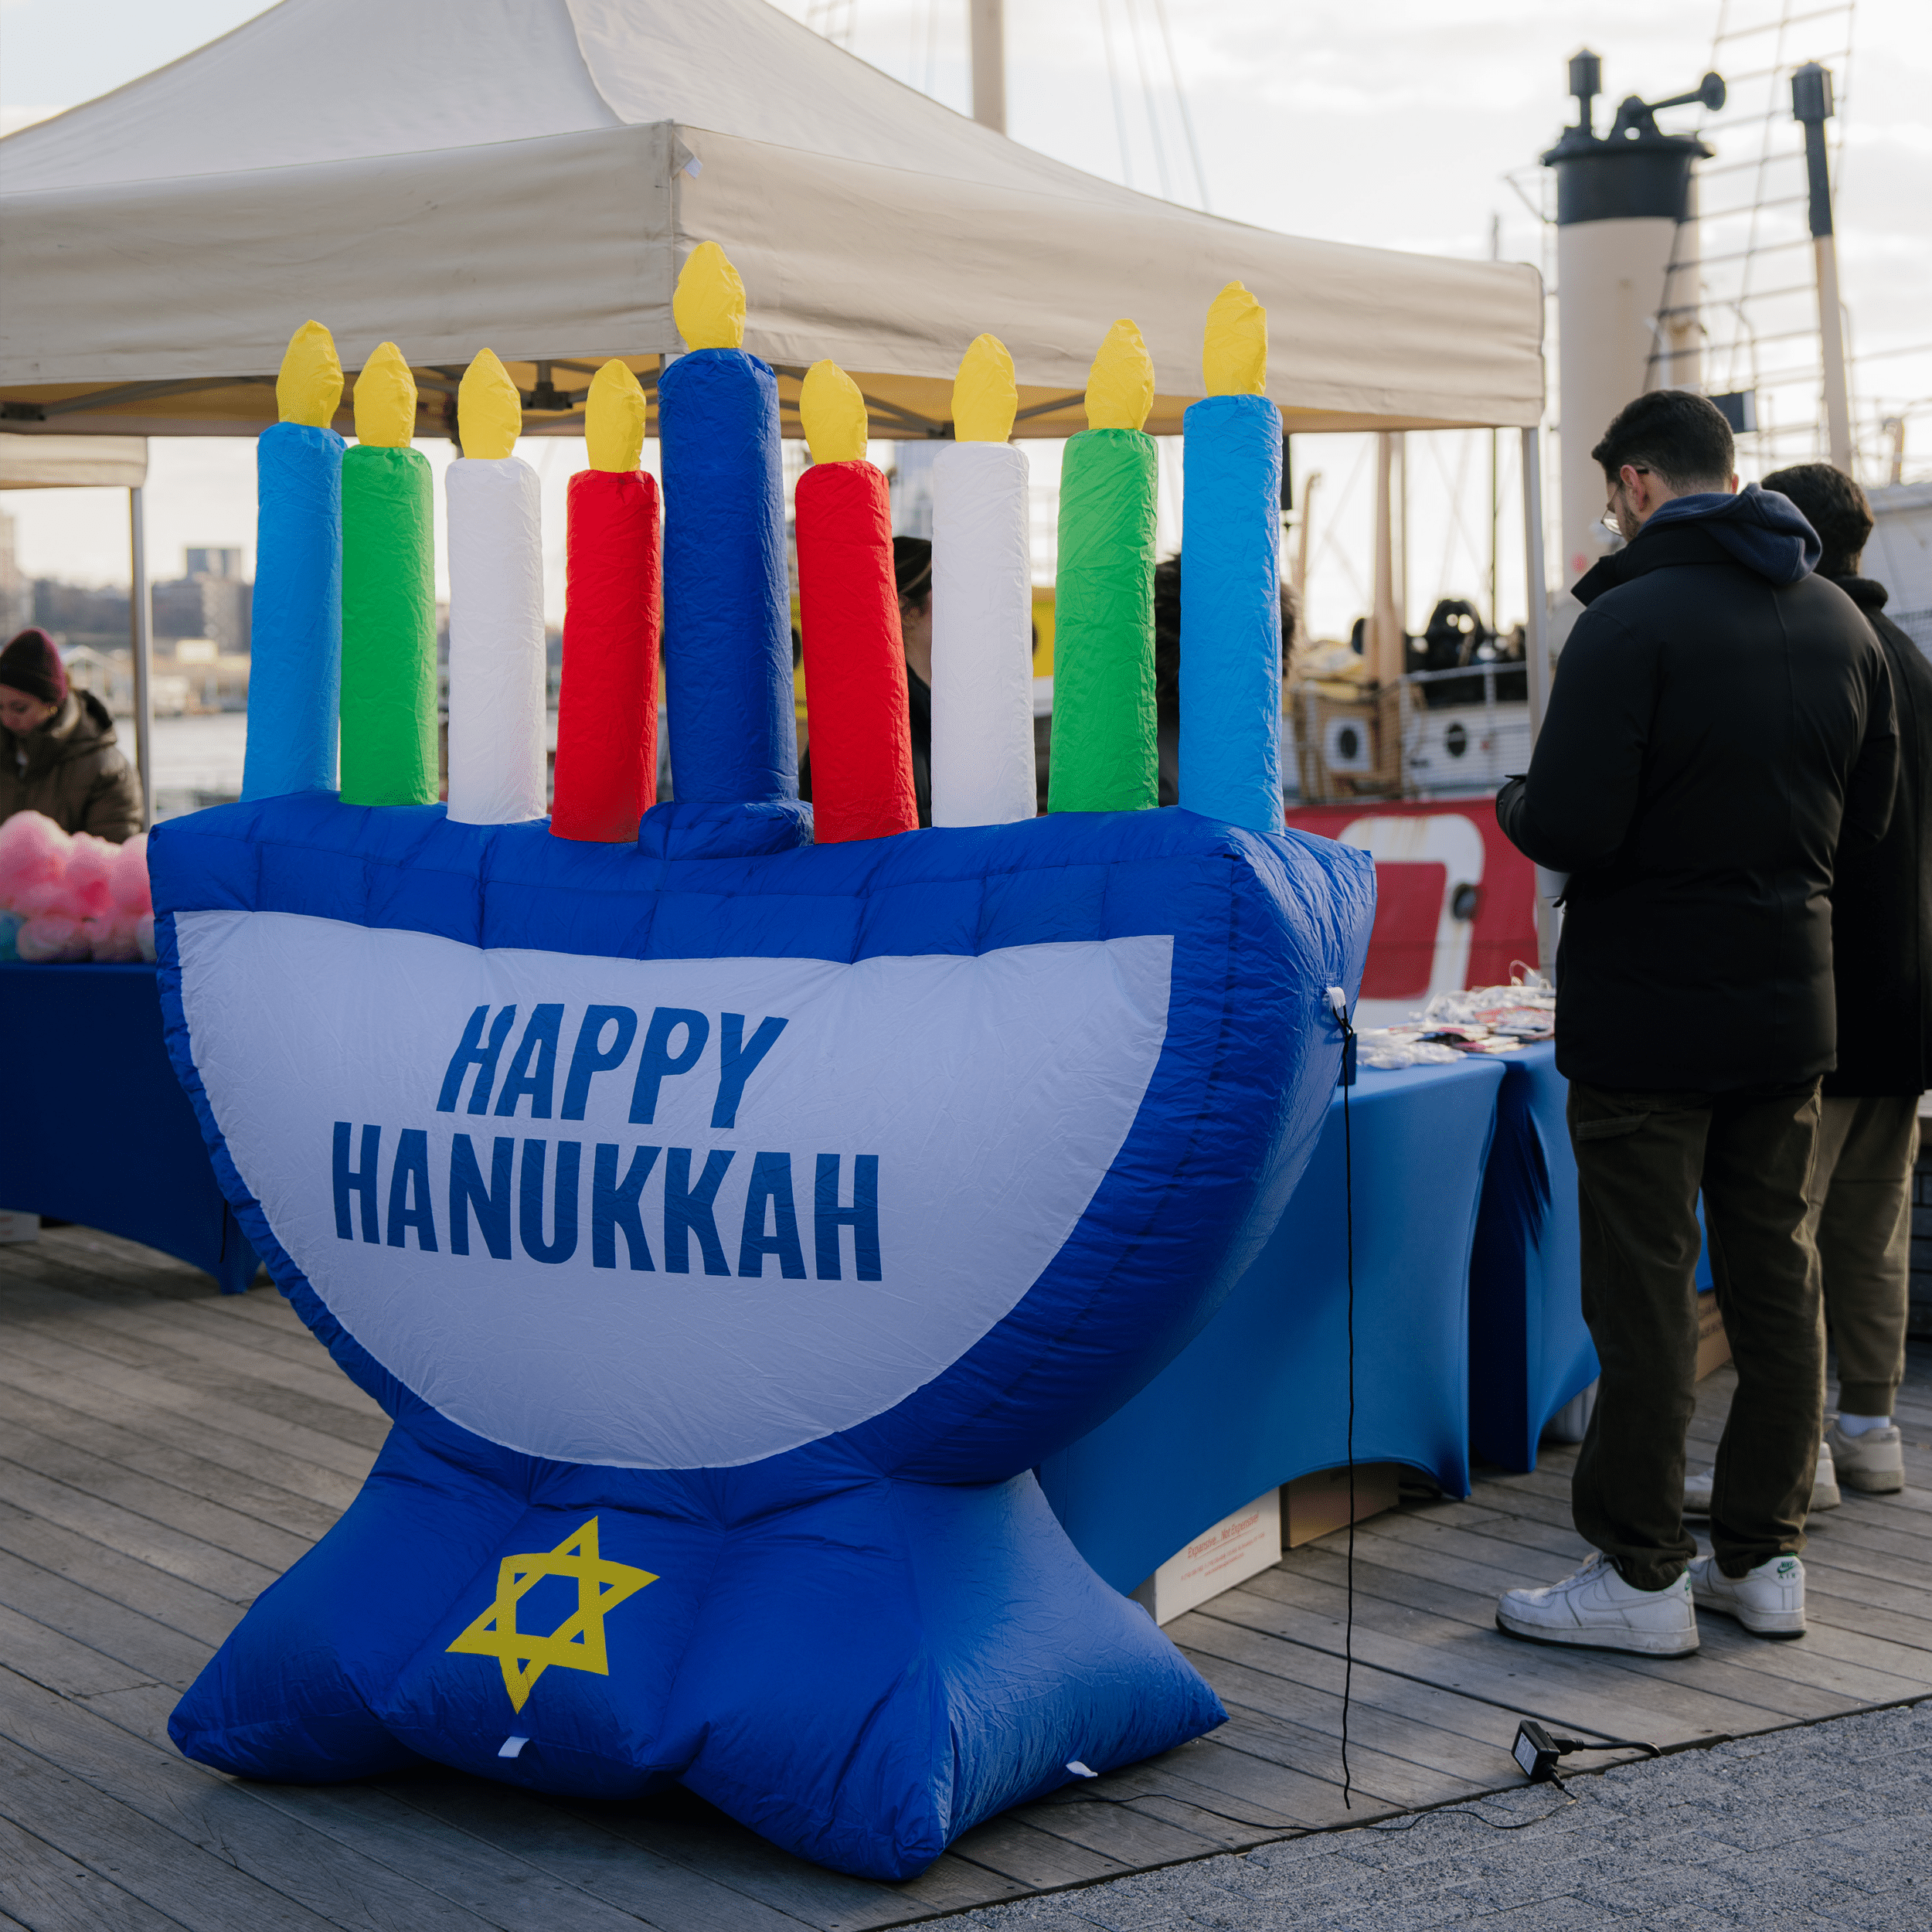 Chanukah at the Seaport